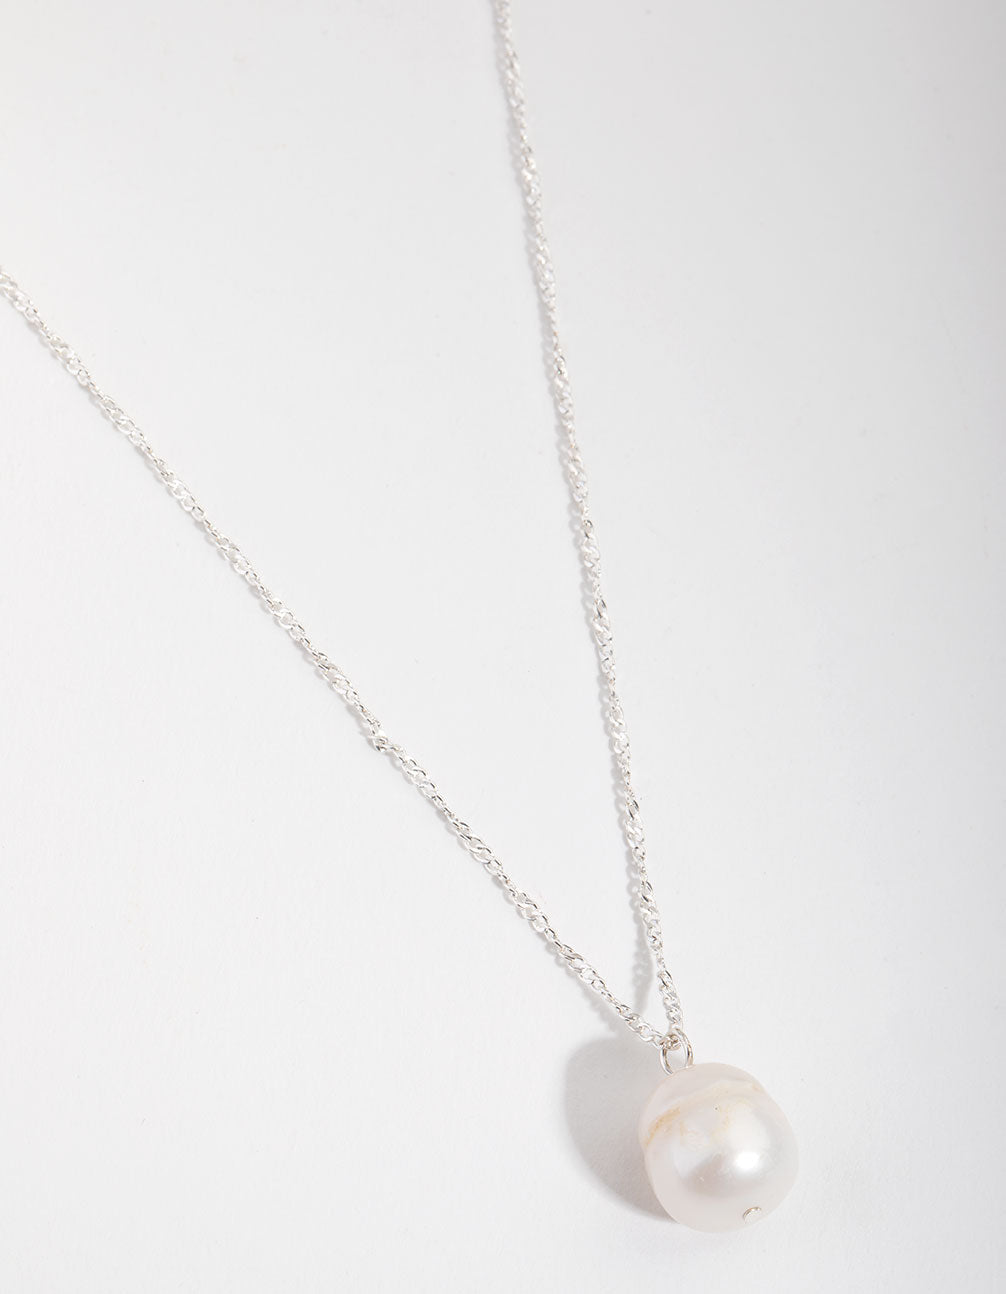 Real Silver Plated Freshwater Pearl Necklace - Lovisa